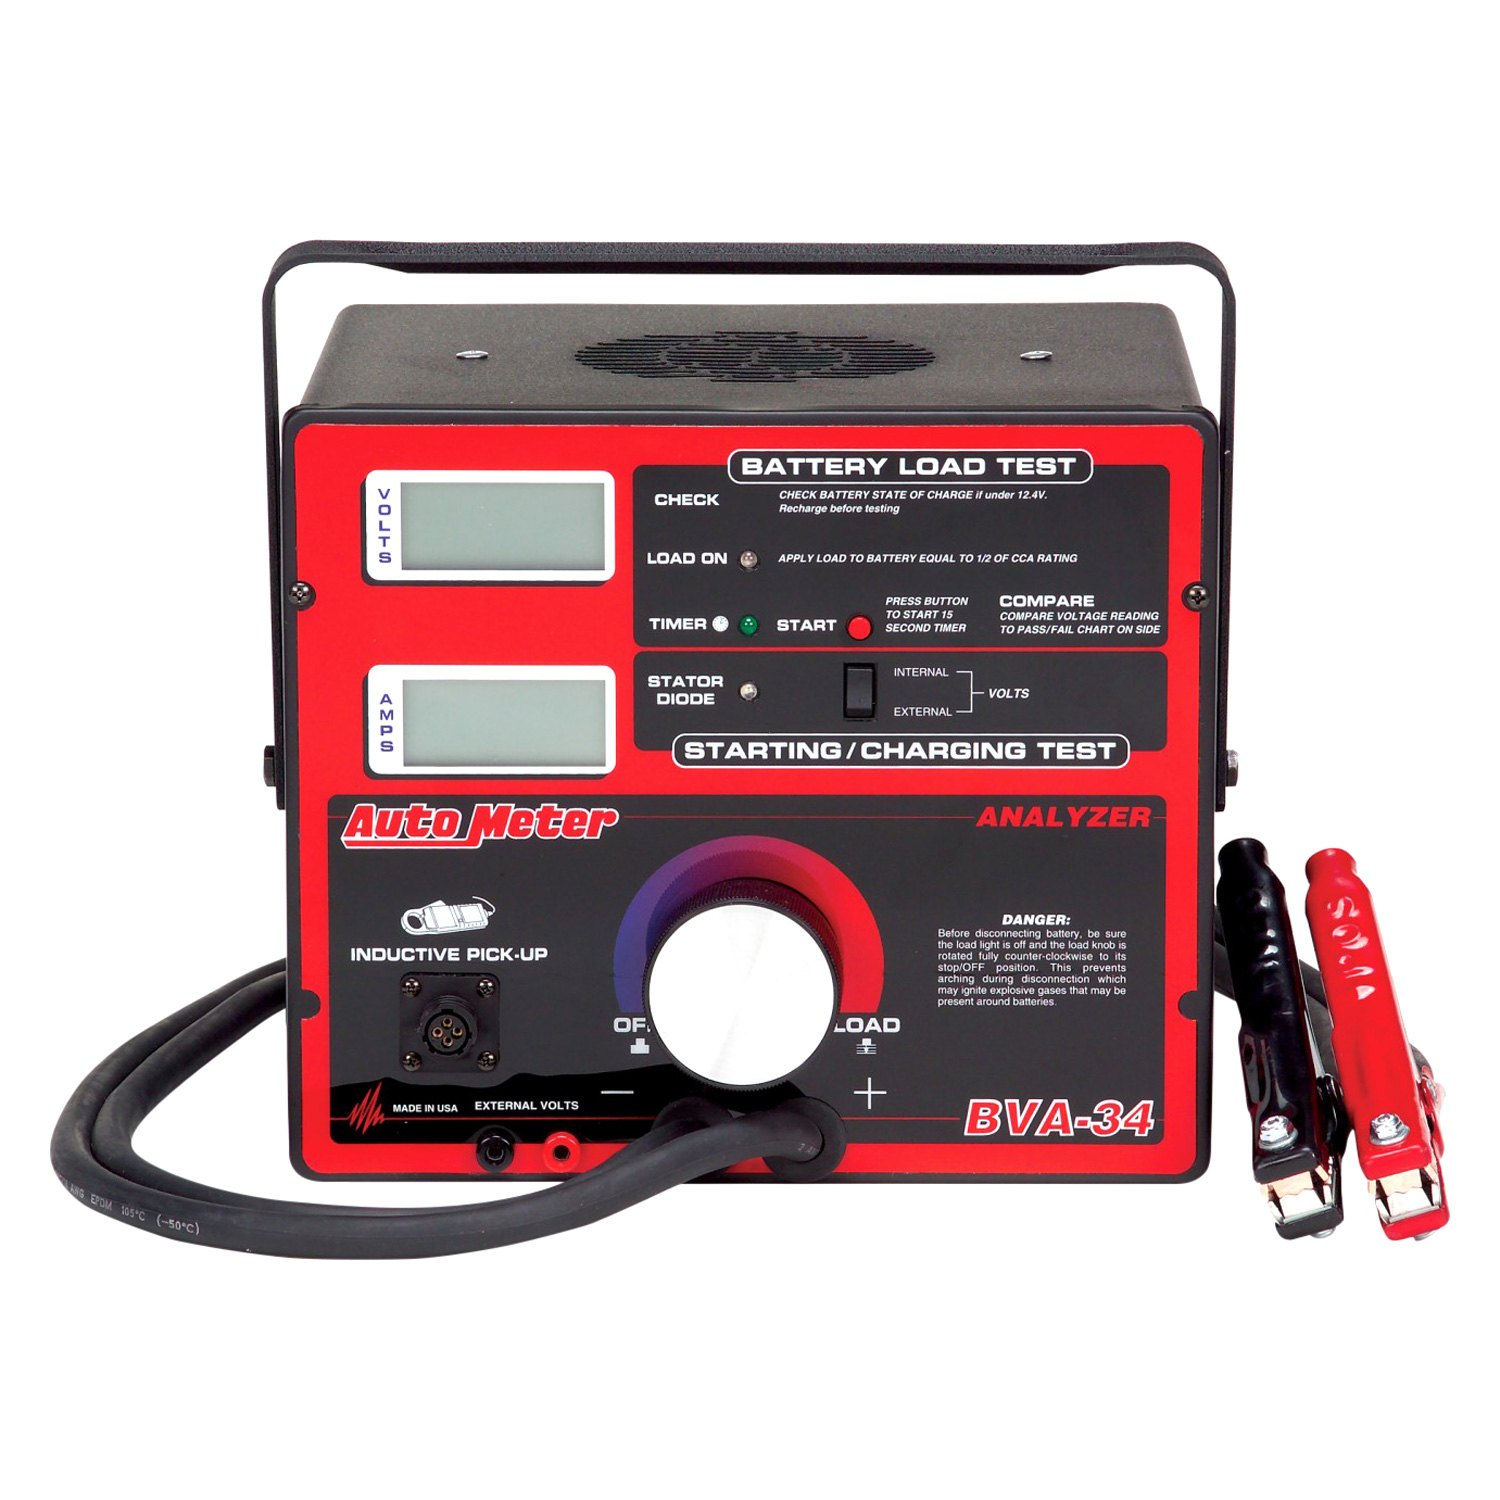 Battery Tester Electronic load. Neware Battery Tester System se 9360. Тестер FCL 4. Pile load Test.